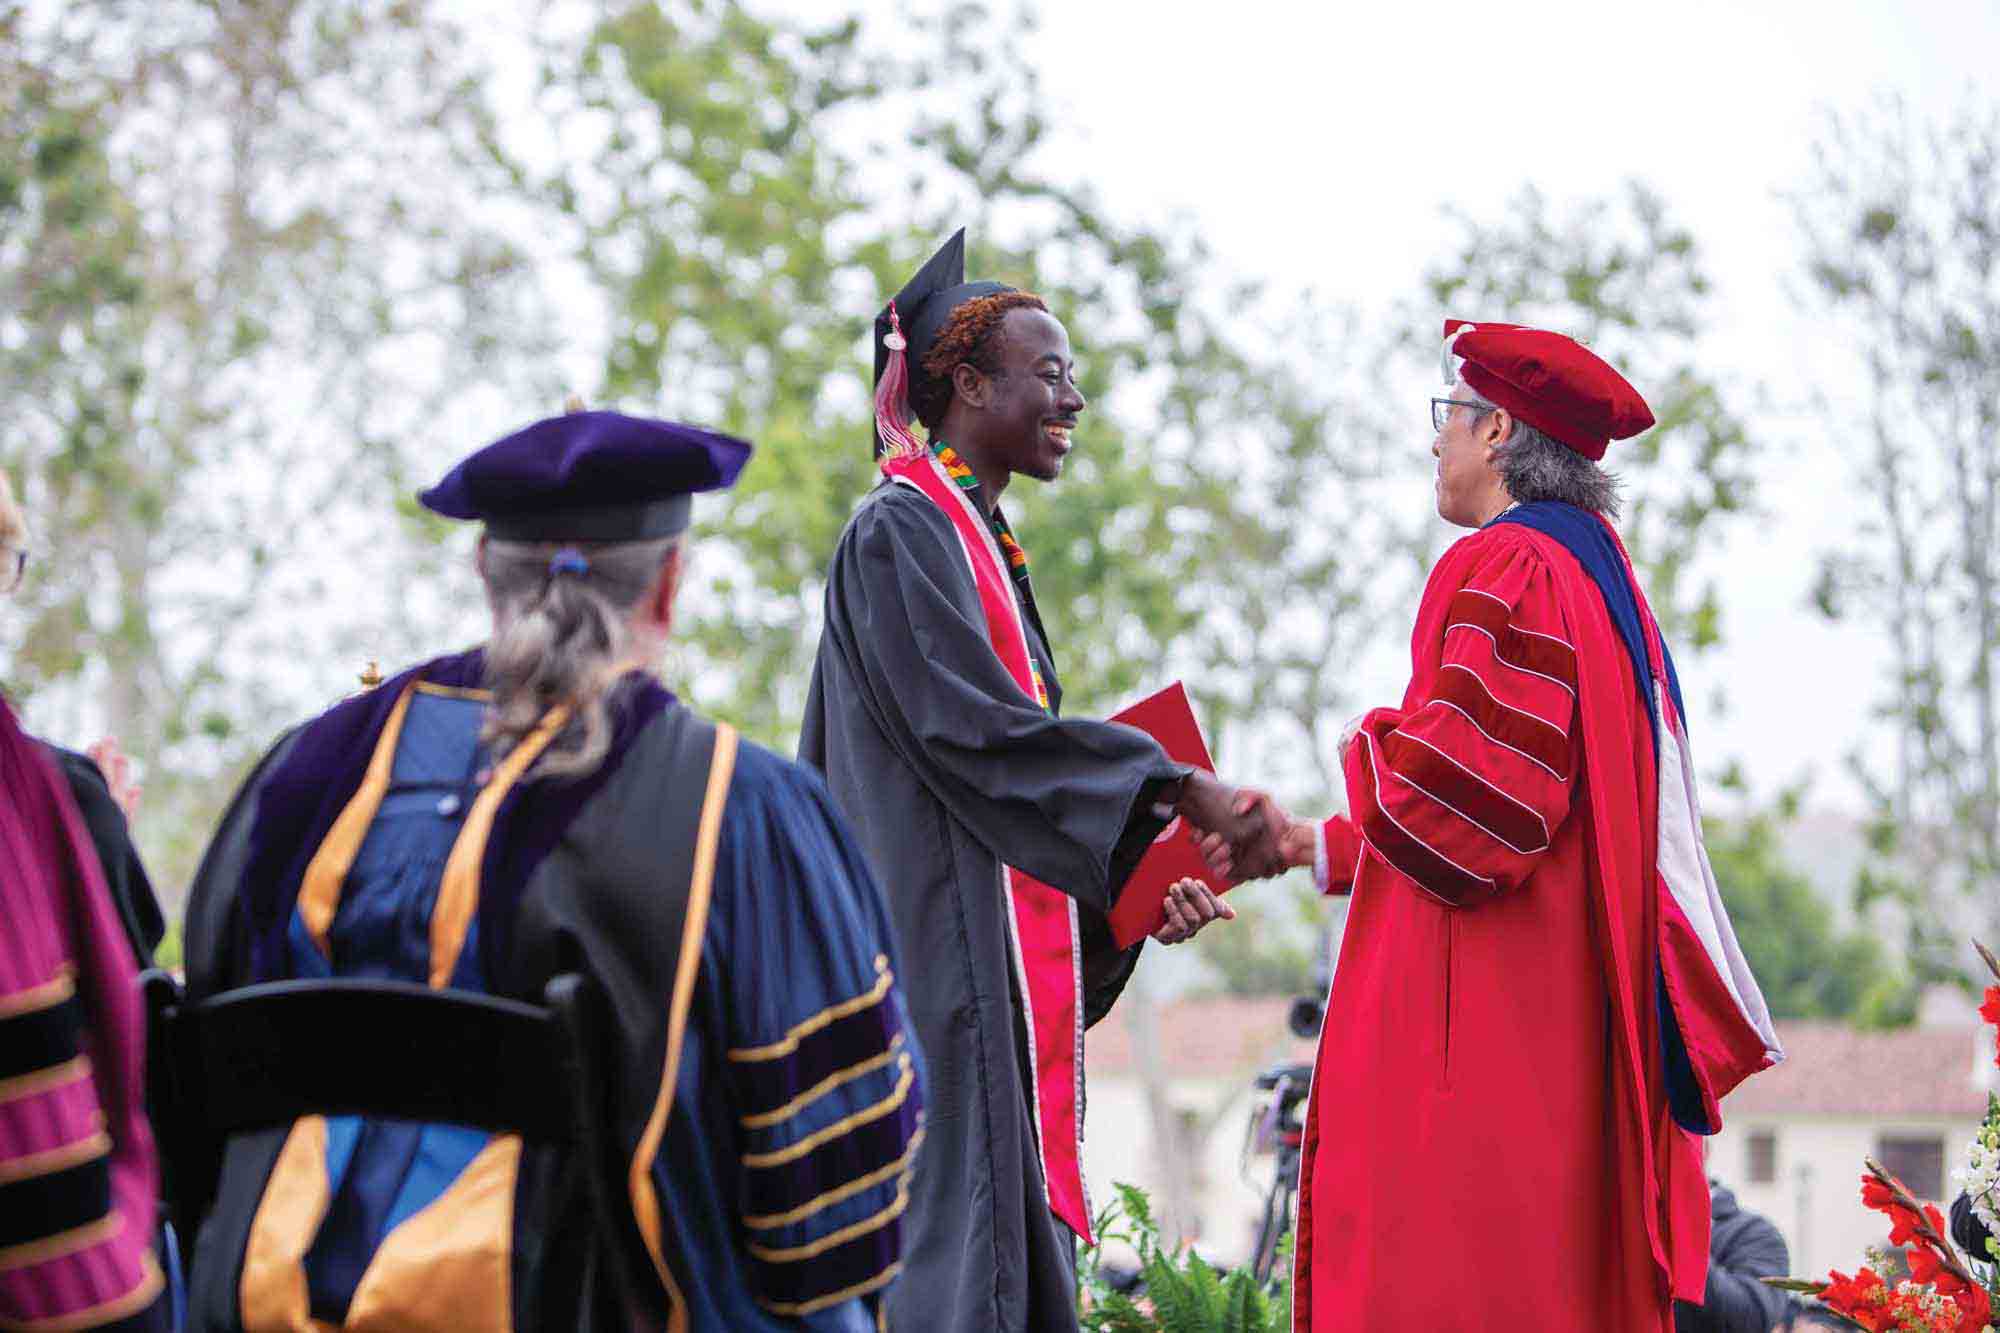 ustin Wiredu-Agyepong receives his diploma from President Yao.